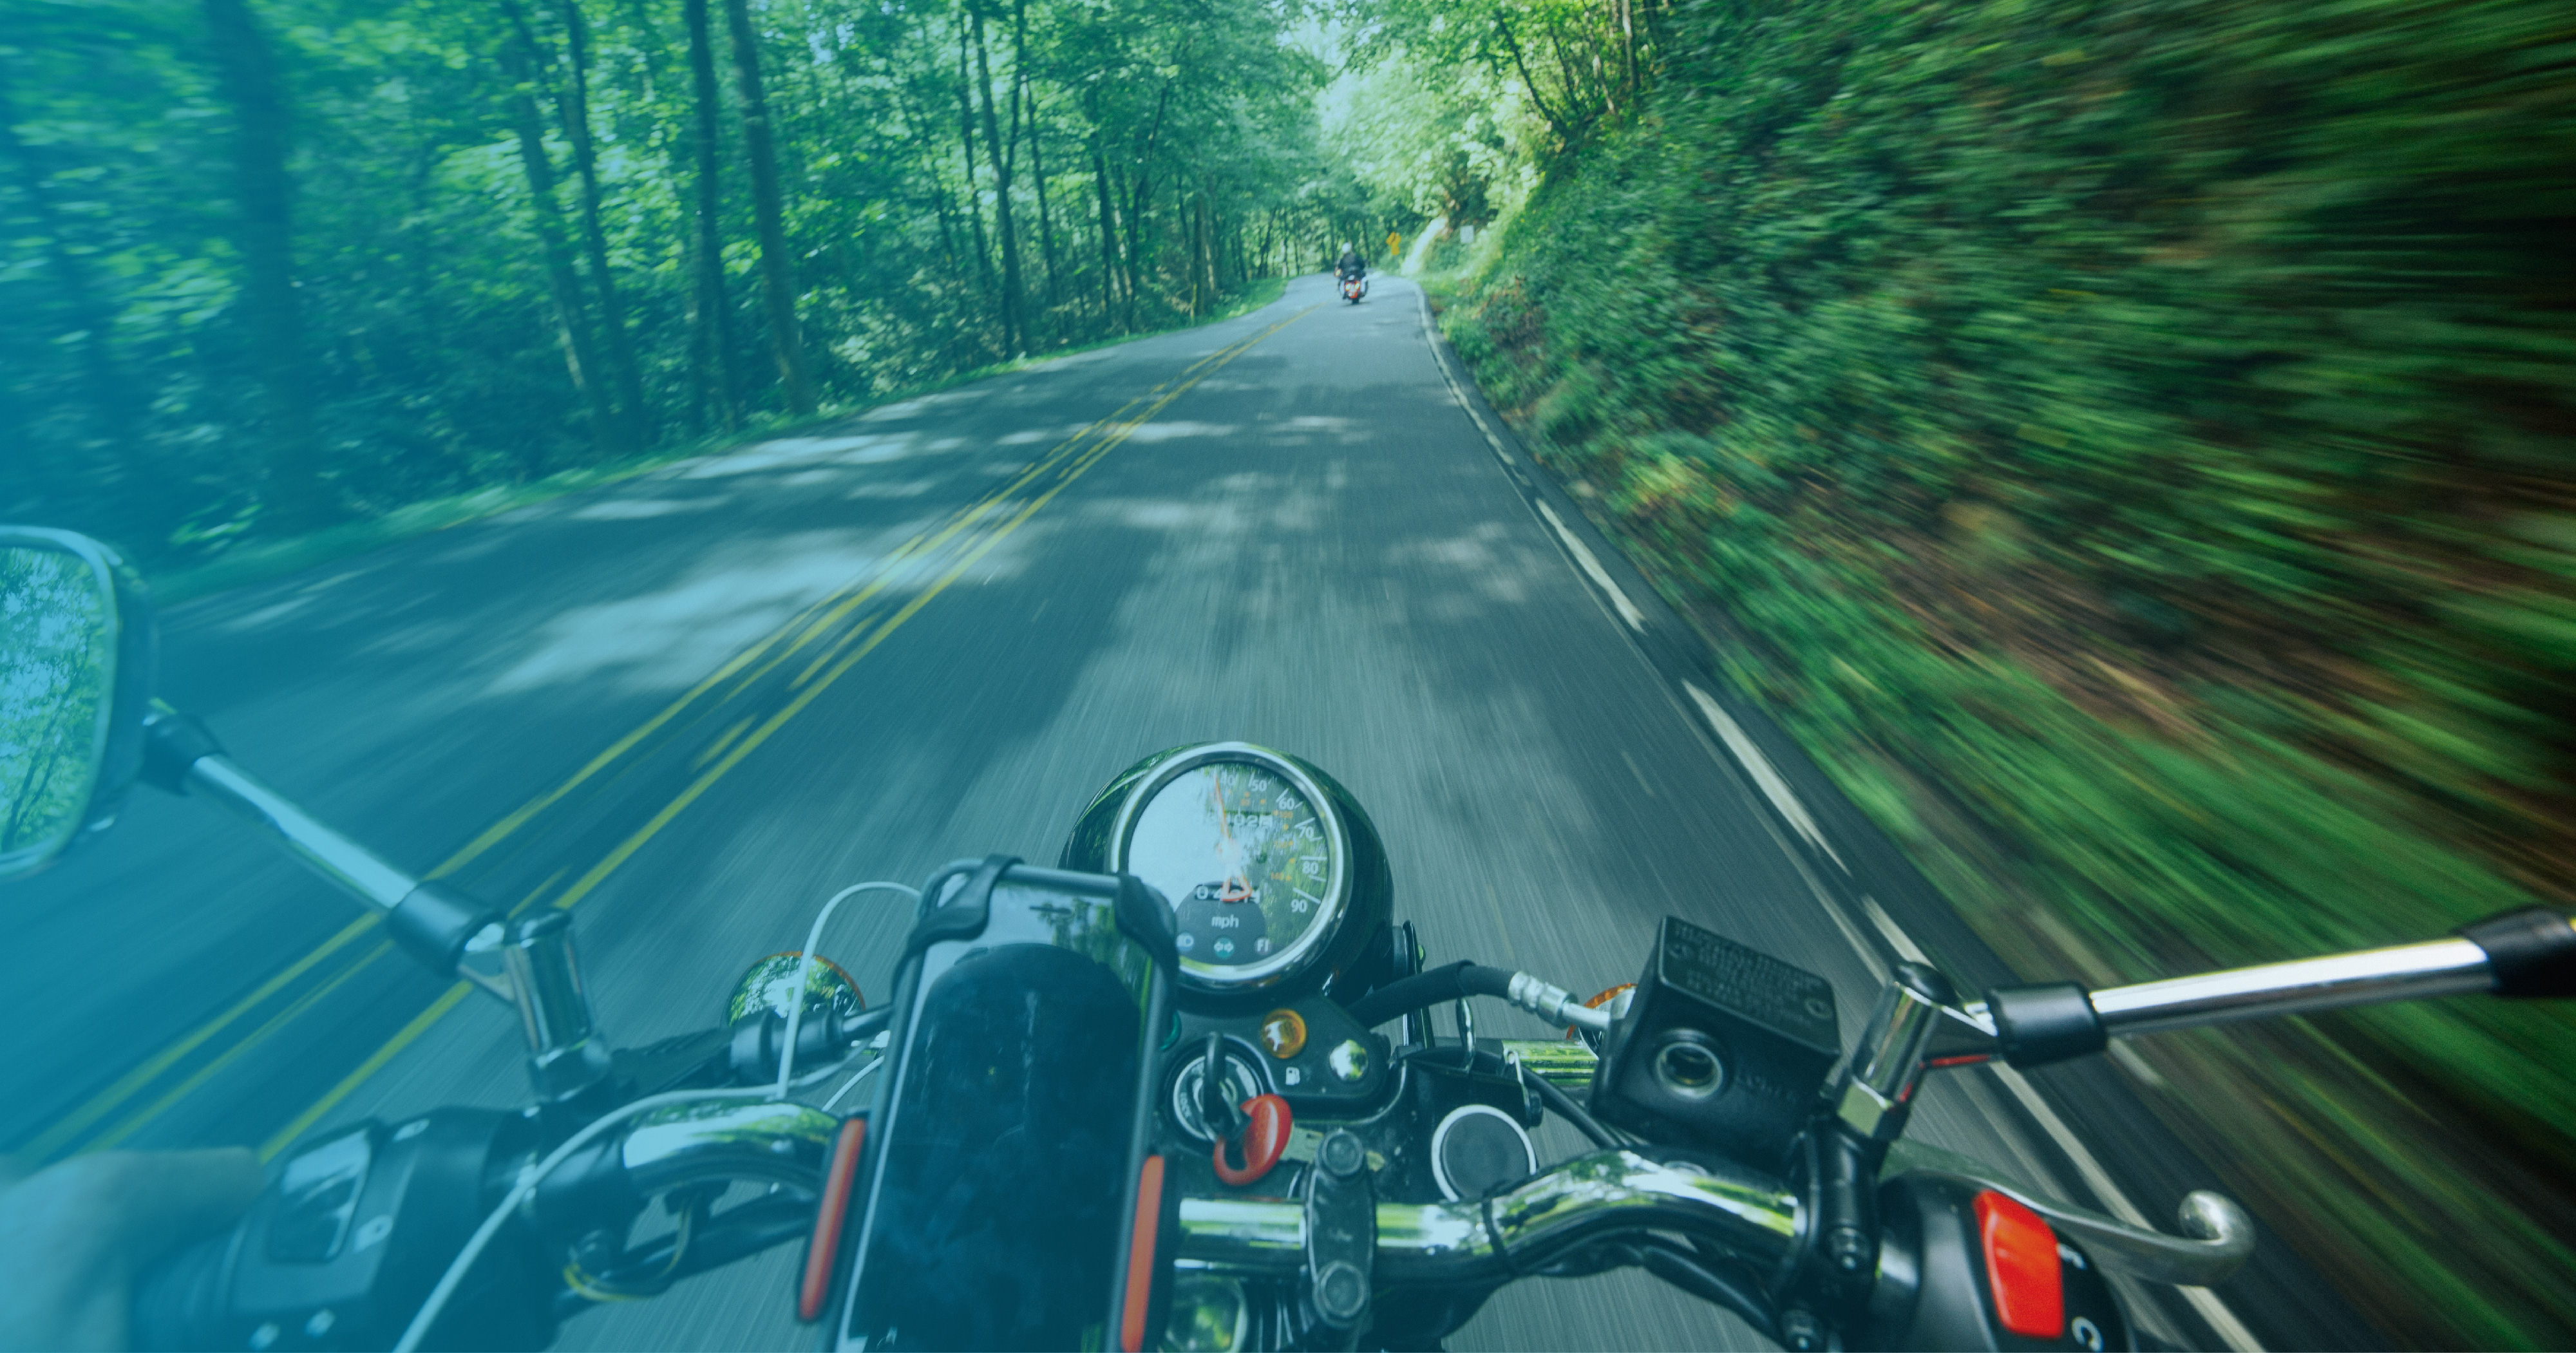 View of motorcycle handlebars speeding down forest road